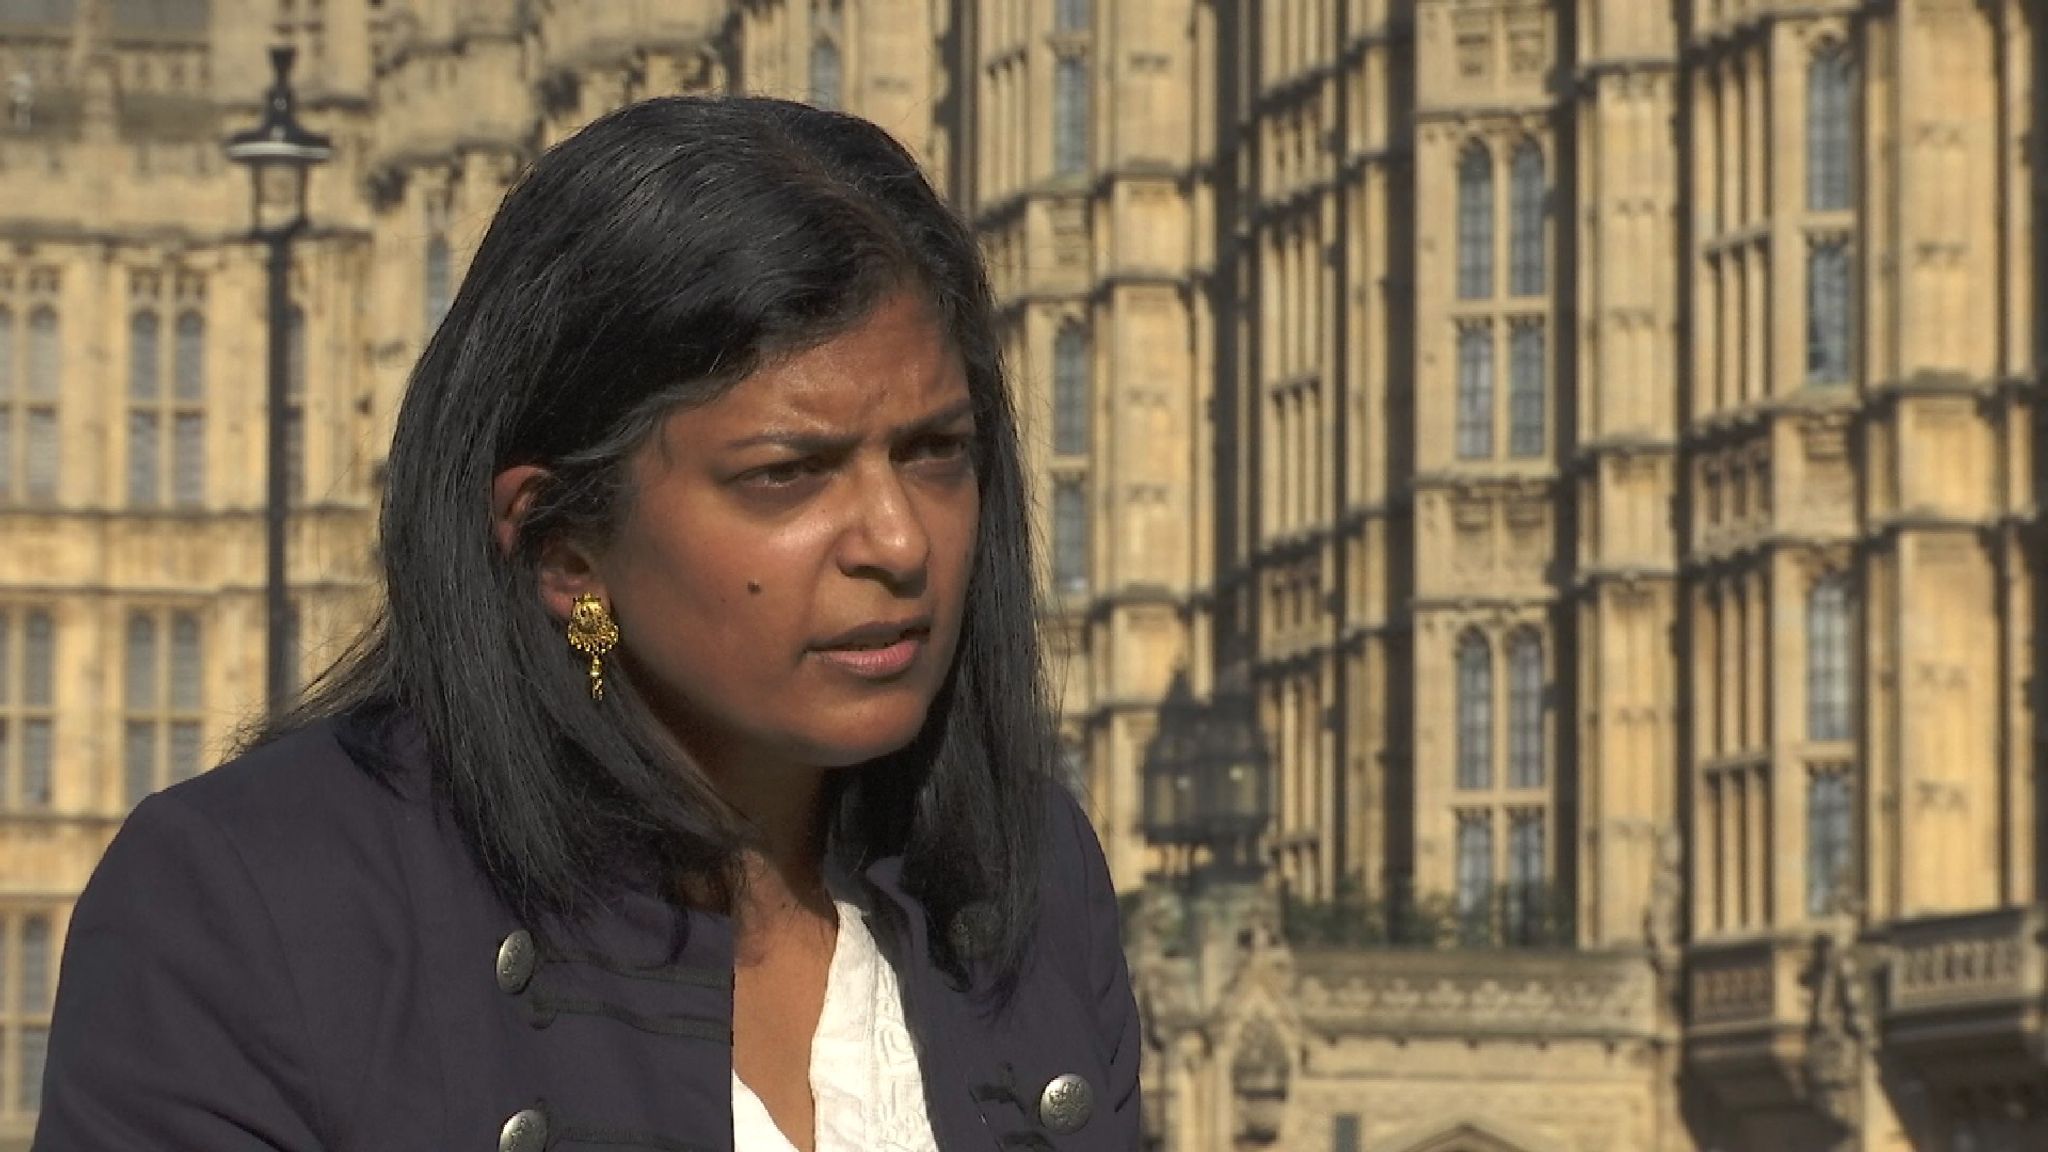 Labour MP Rupa Huq I was sexually harassed by MEP in my 20s Politics News Sky News